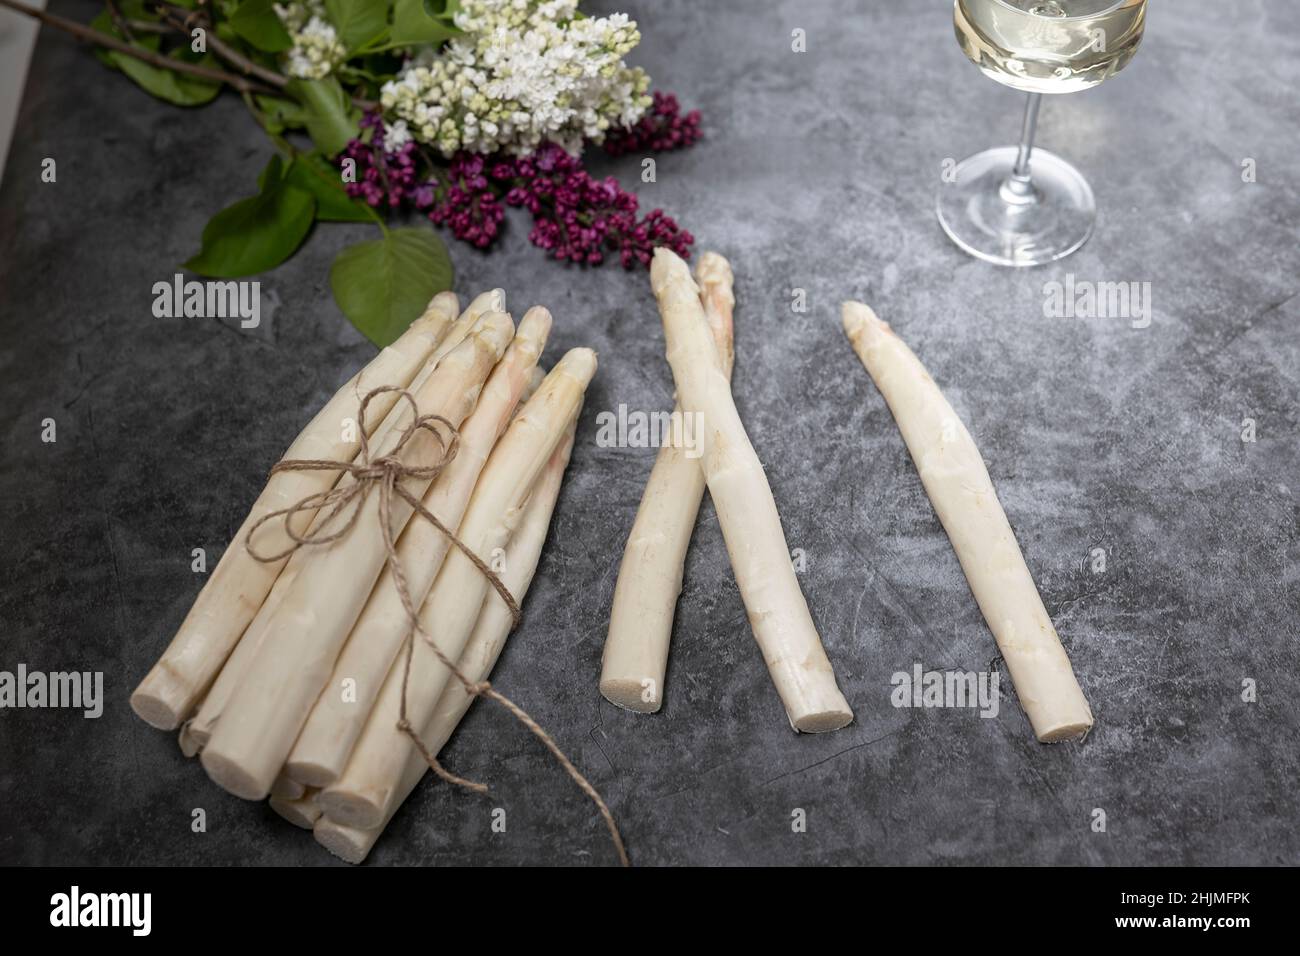 Bunch of fresh white asparagus on a stone table Stock Photo